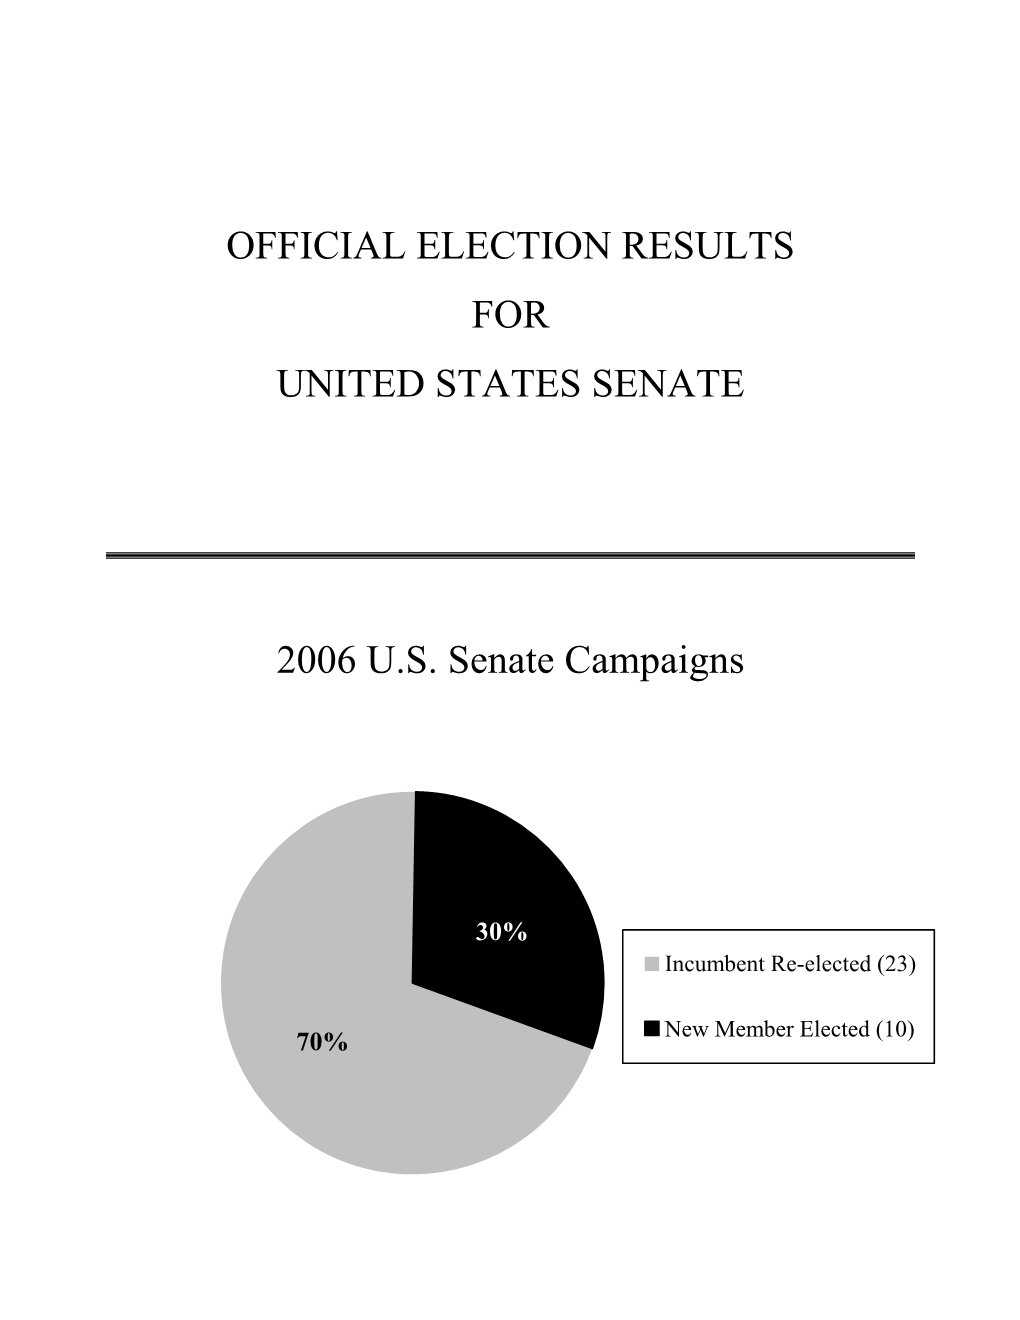 Federal Elections 2006: Election Results for the U.S. Senate and The